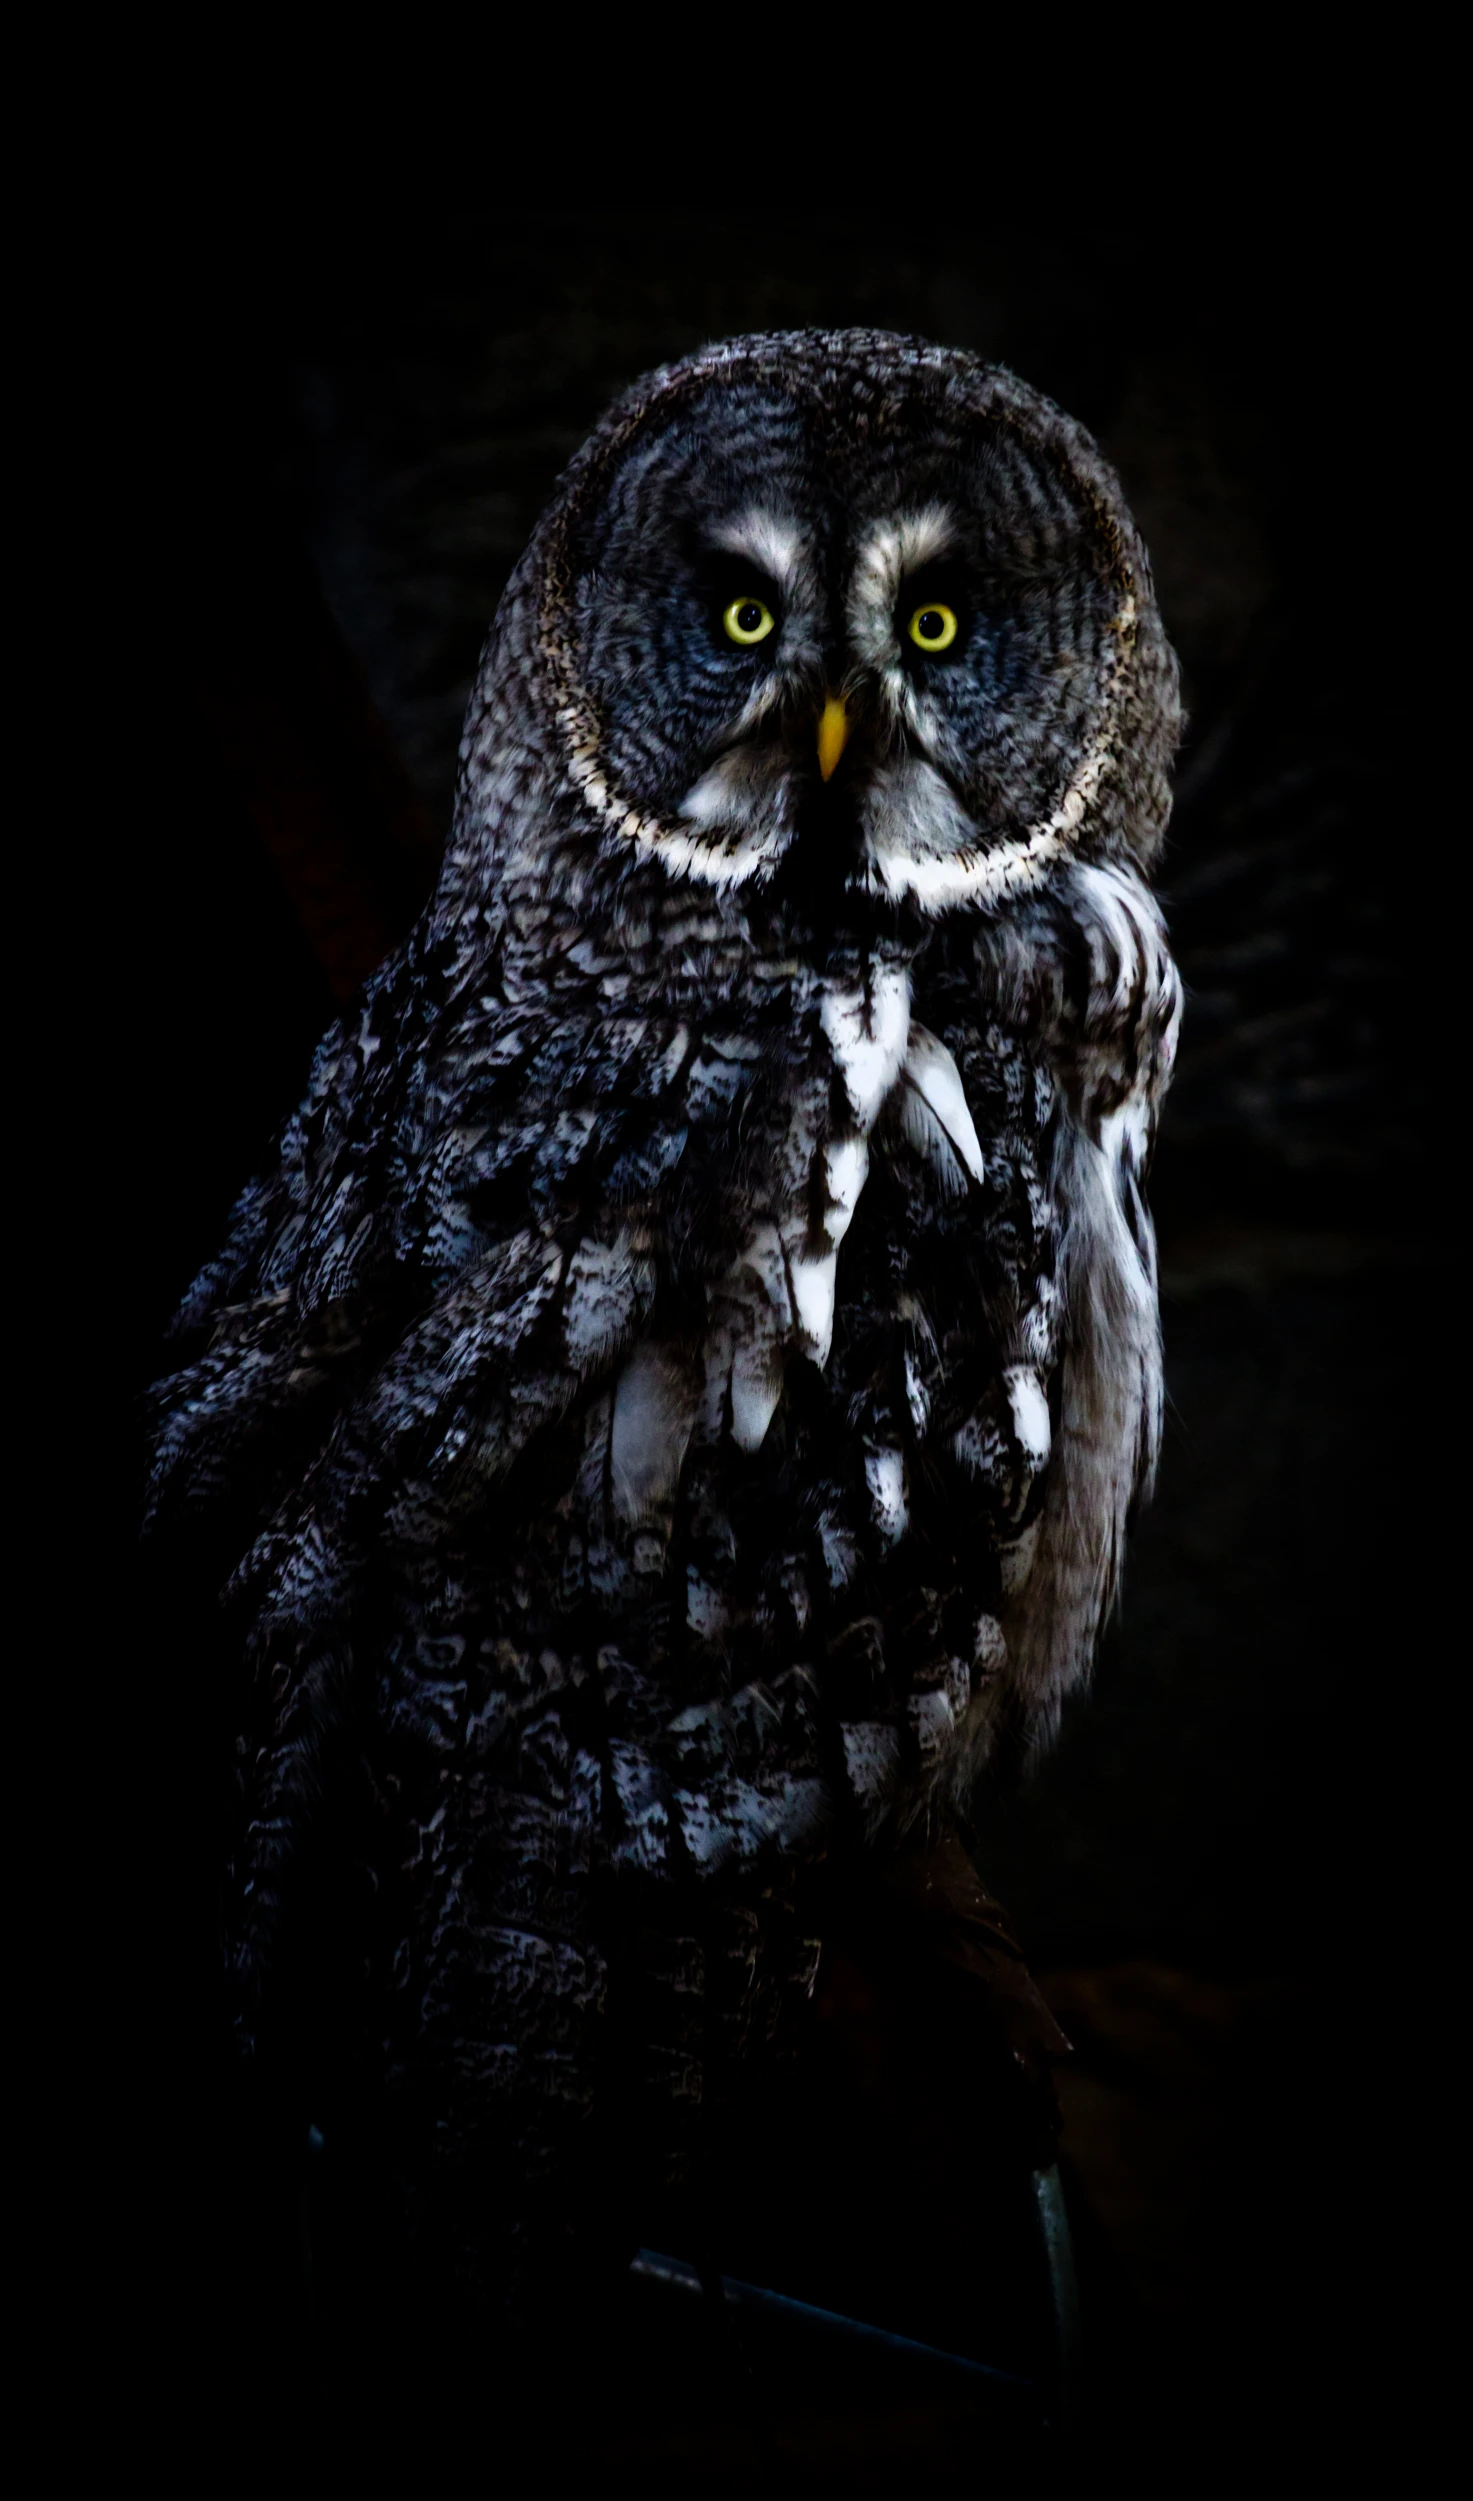 an owl is lit up with a bright yellow eye